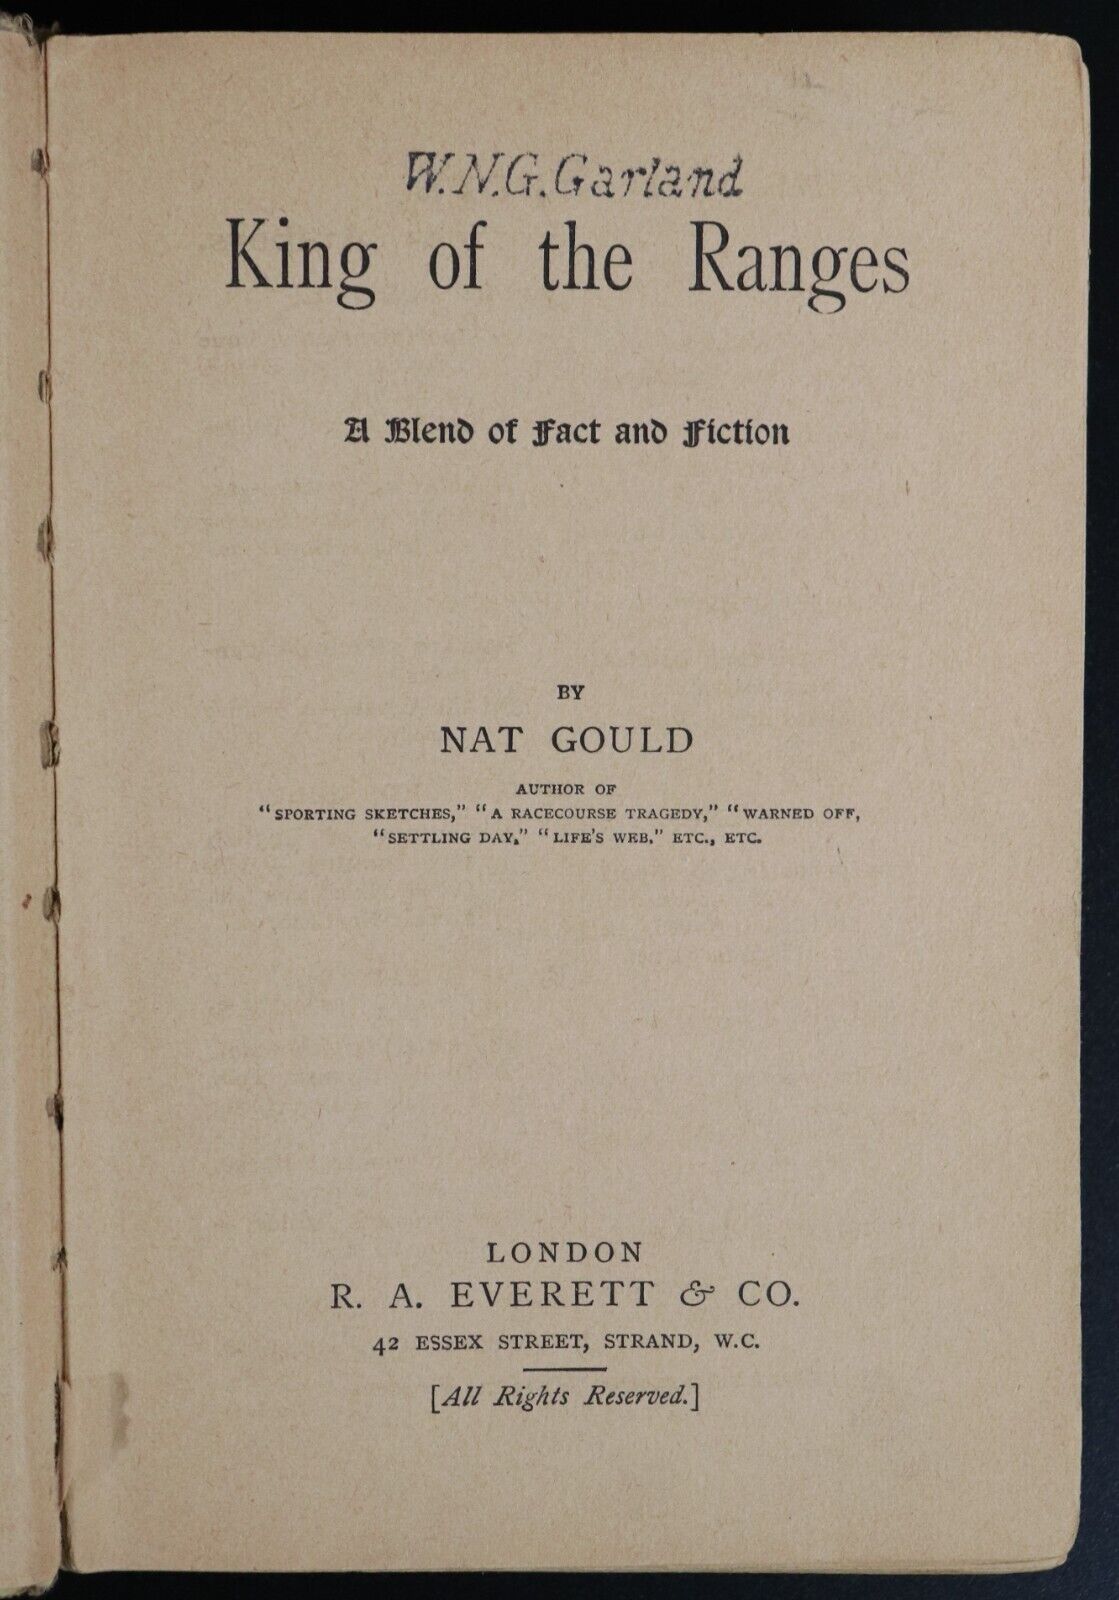 1902 King Of The Ranges by Nat Gould 1st Edition Antique Australian Fiction Book - 0